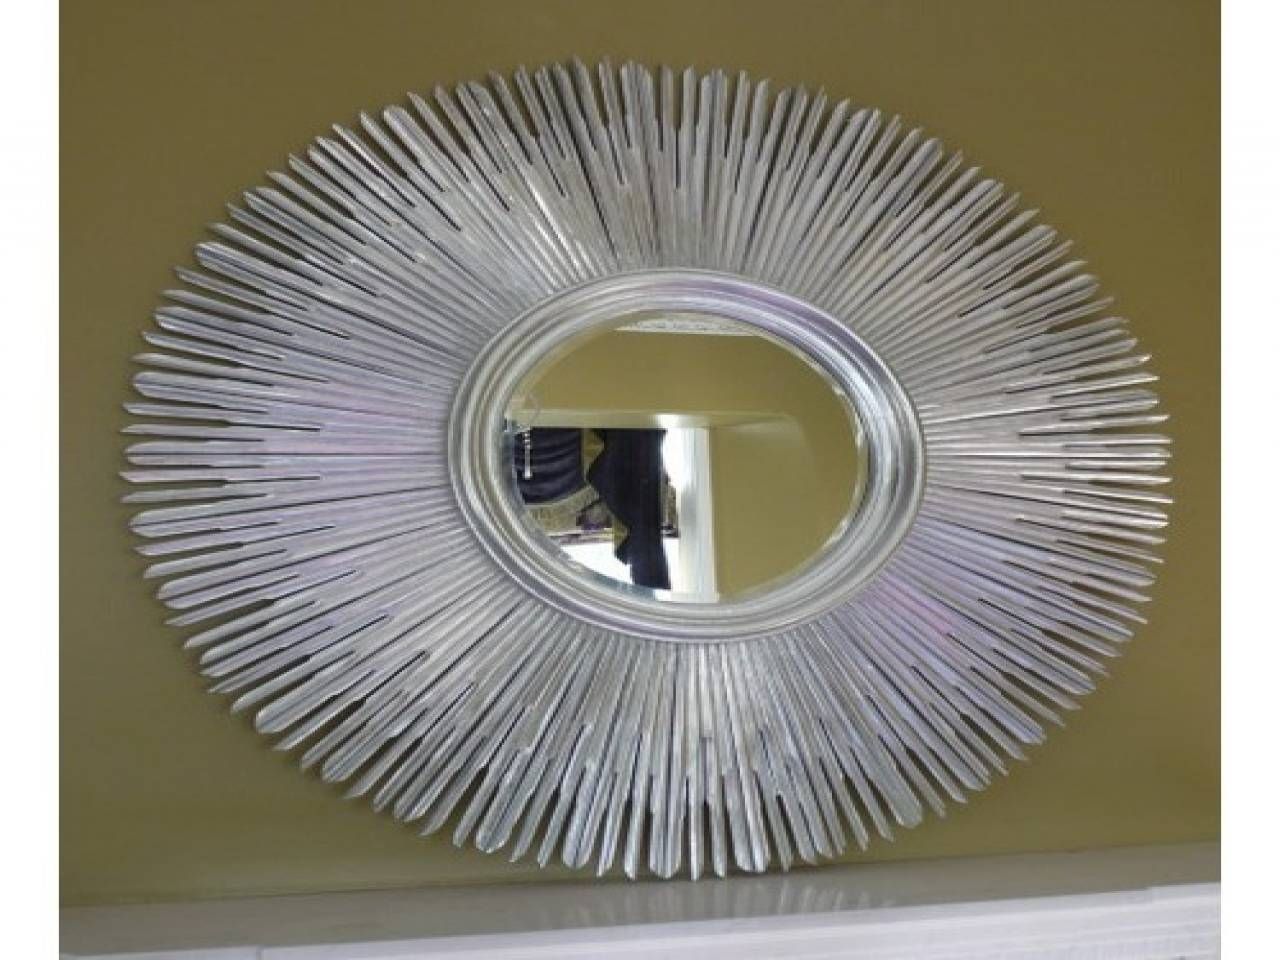 Large Round Silver Mirror 57 Trendy Interior Or Design Wall Pertaining To Round Silver Mirrors (View 13 of 15)